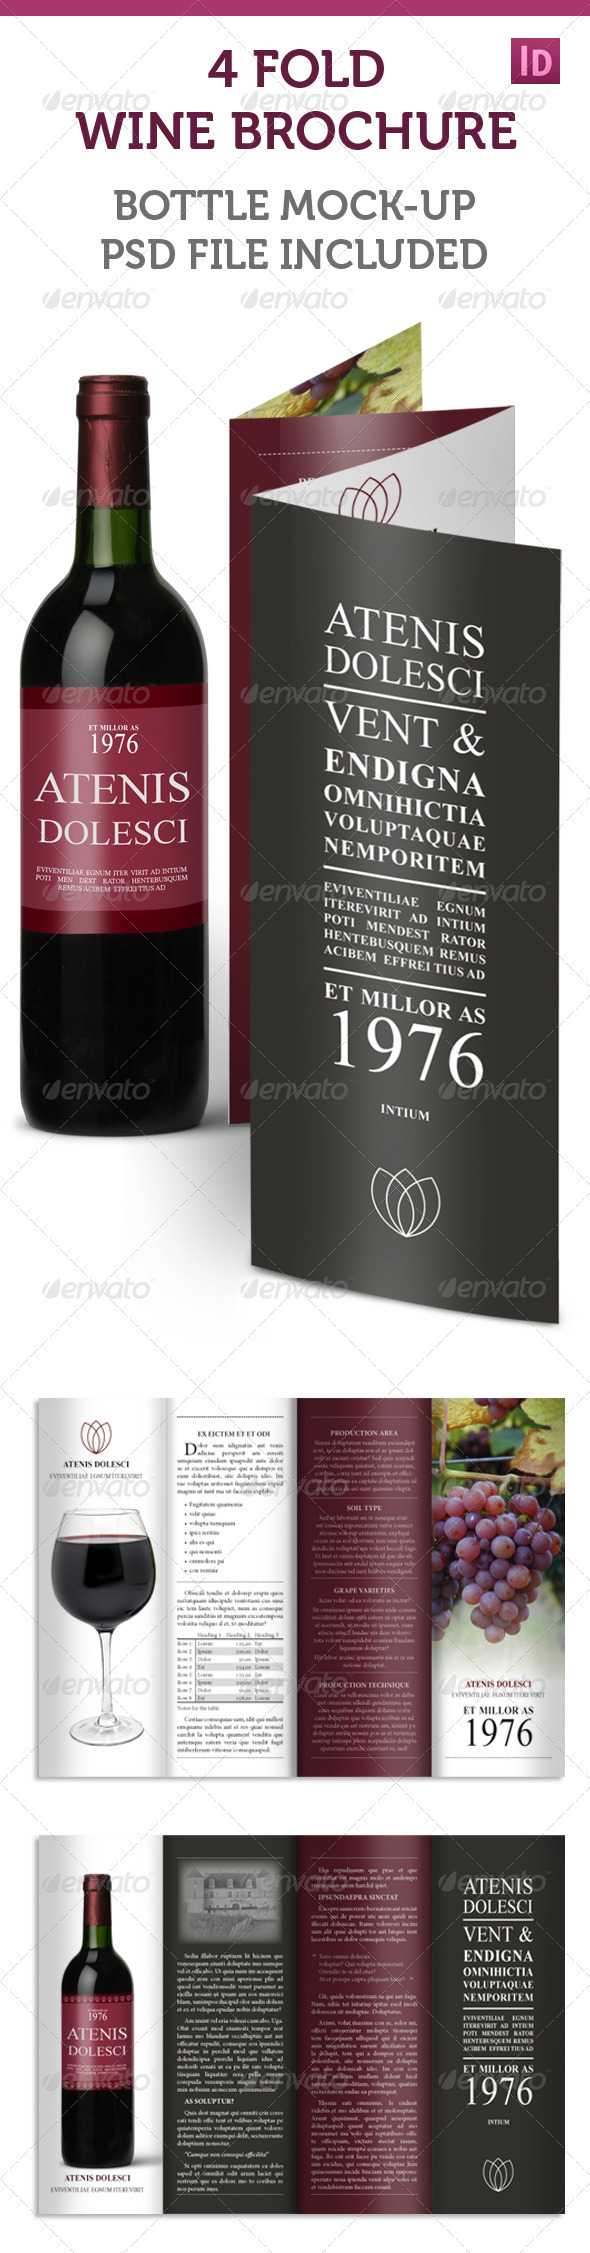 Wine Brochure Templates From Graphicriver For Wine Brochure Template